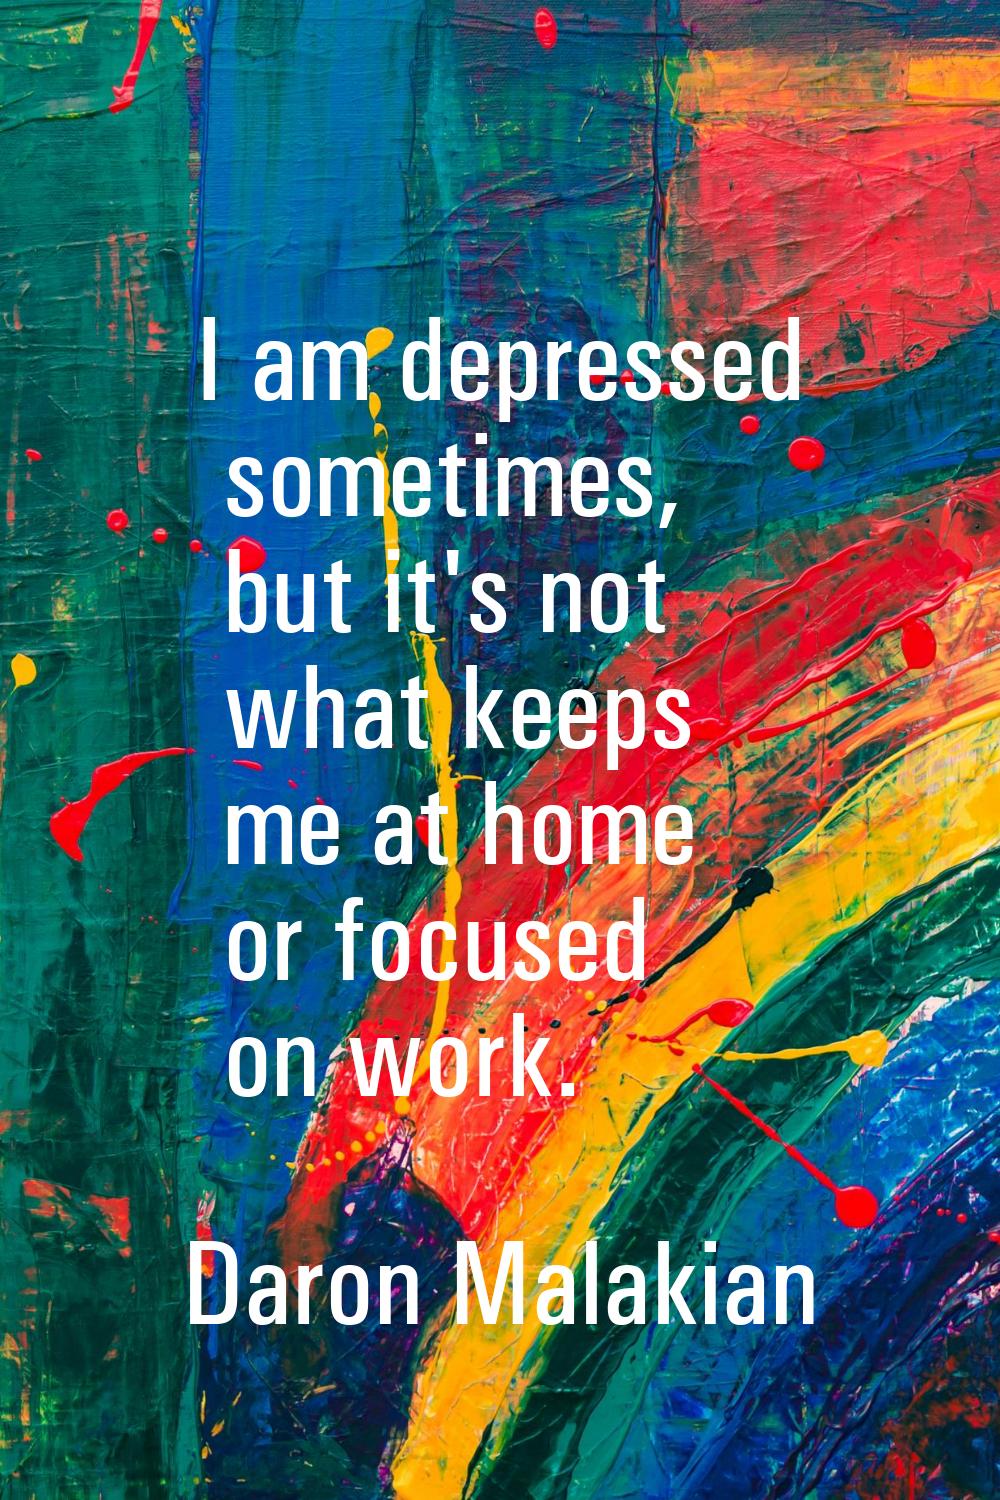 I am depressed sometimes, but it's not what keeps me at home or focused on work.